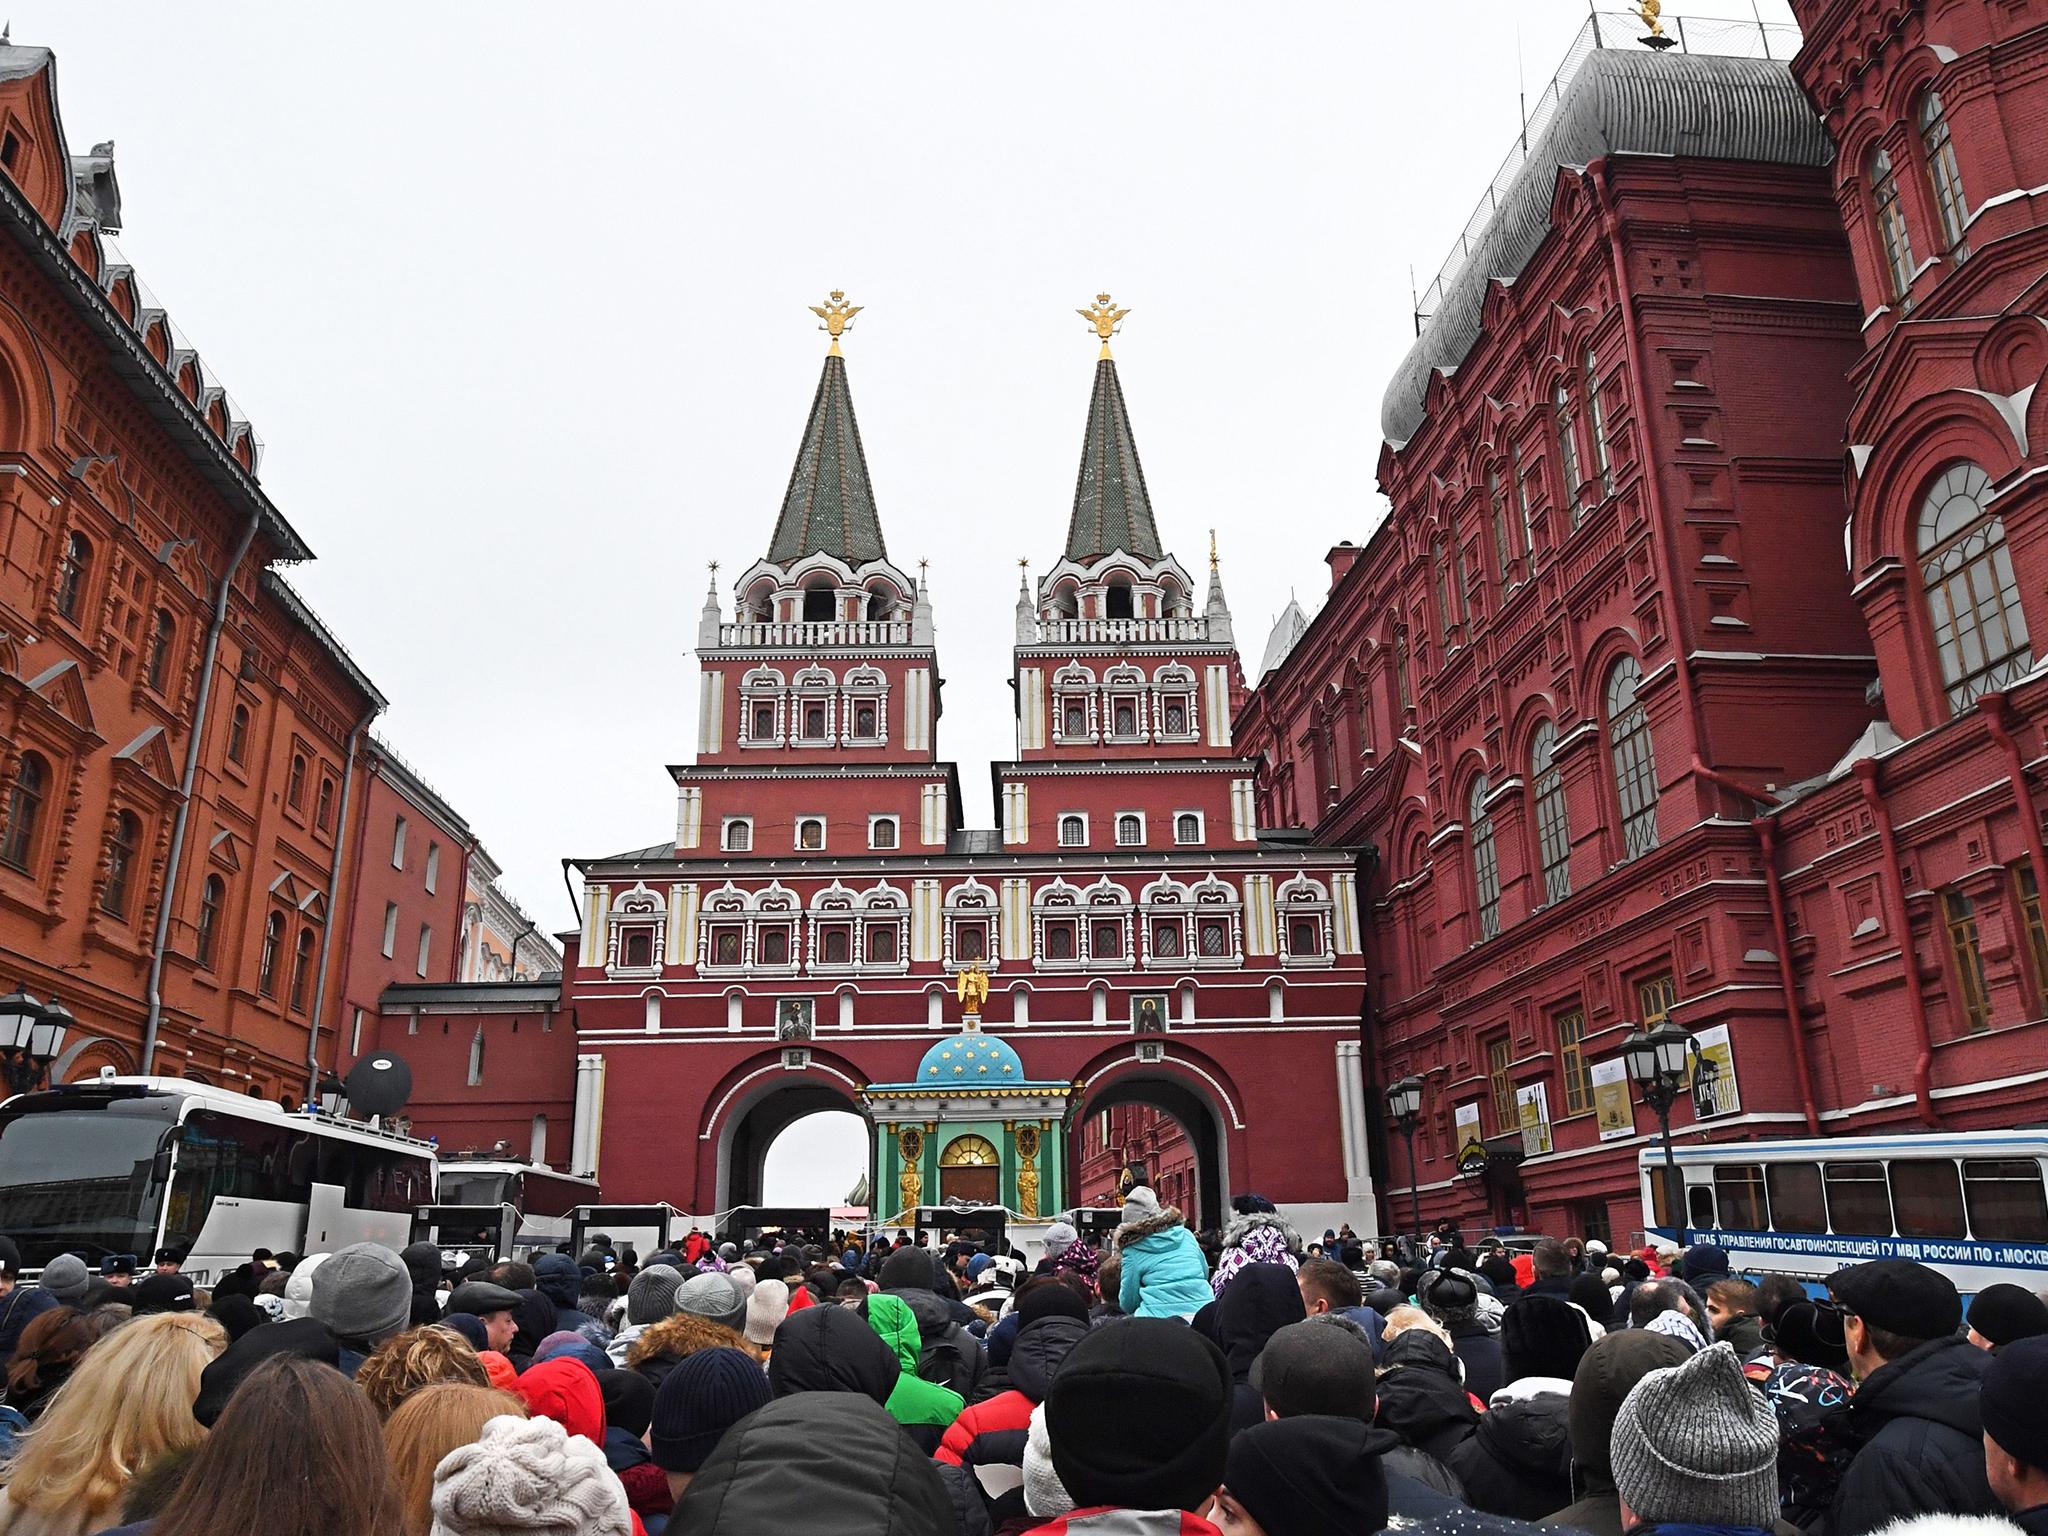 The organisation were said to be based near the Red Square in Moscow